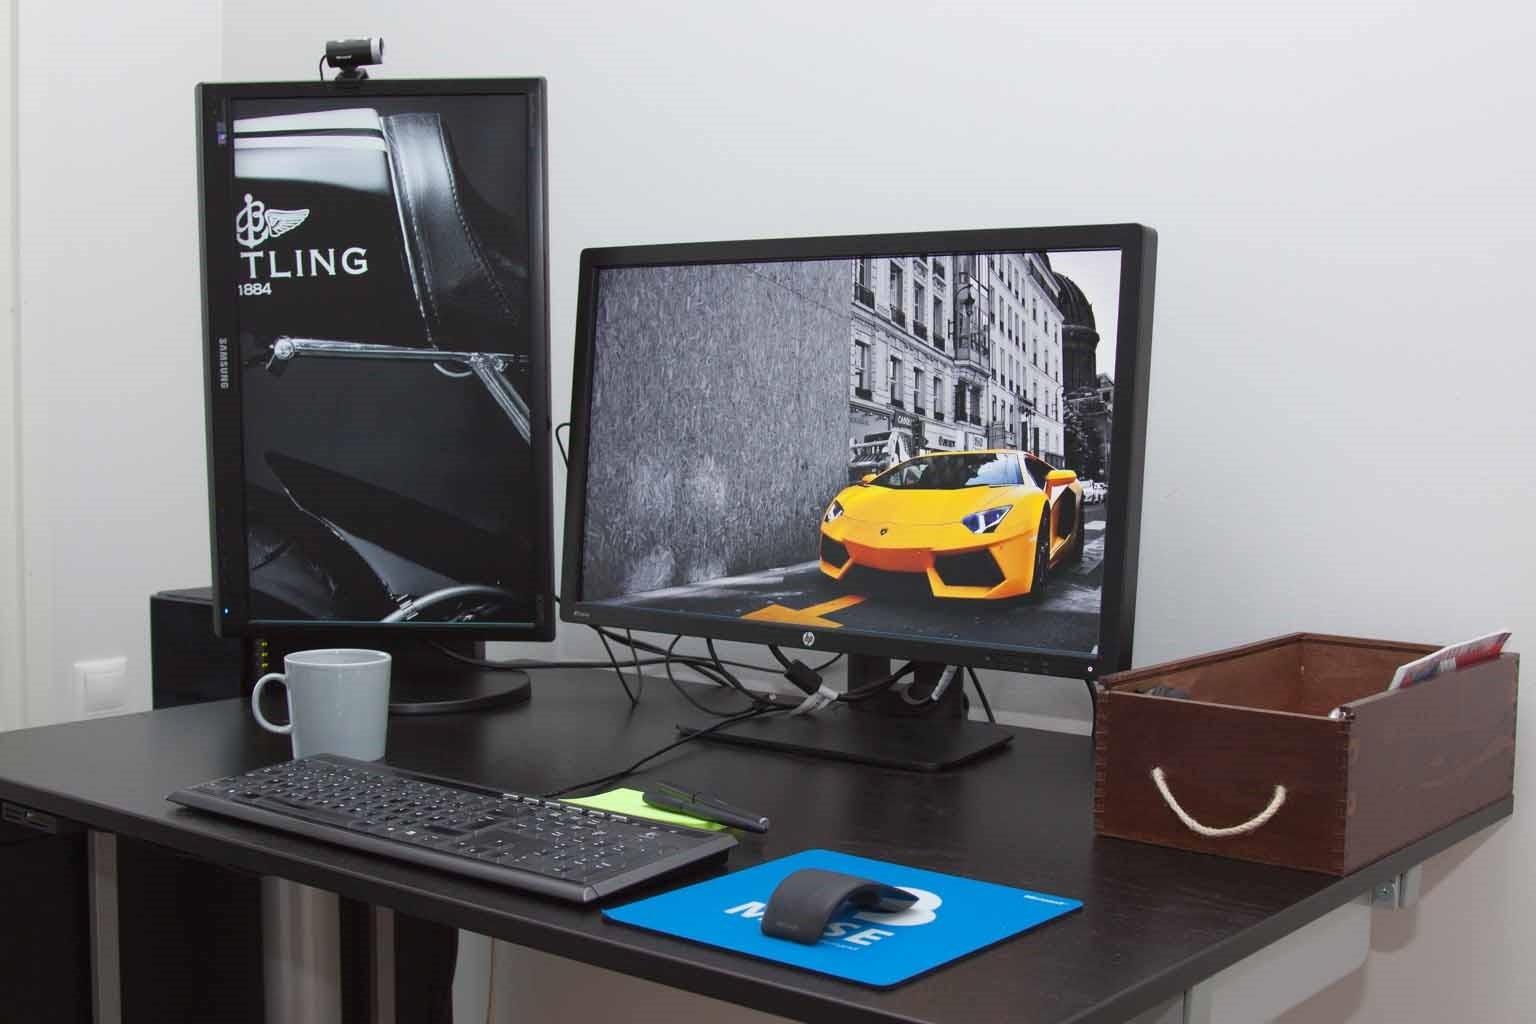 Working from home: Using a standing desk